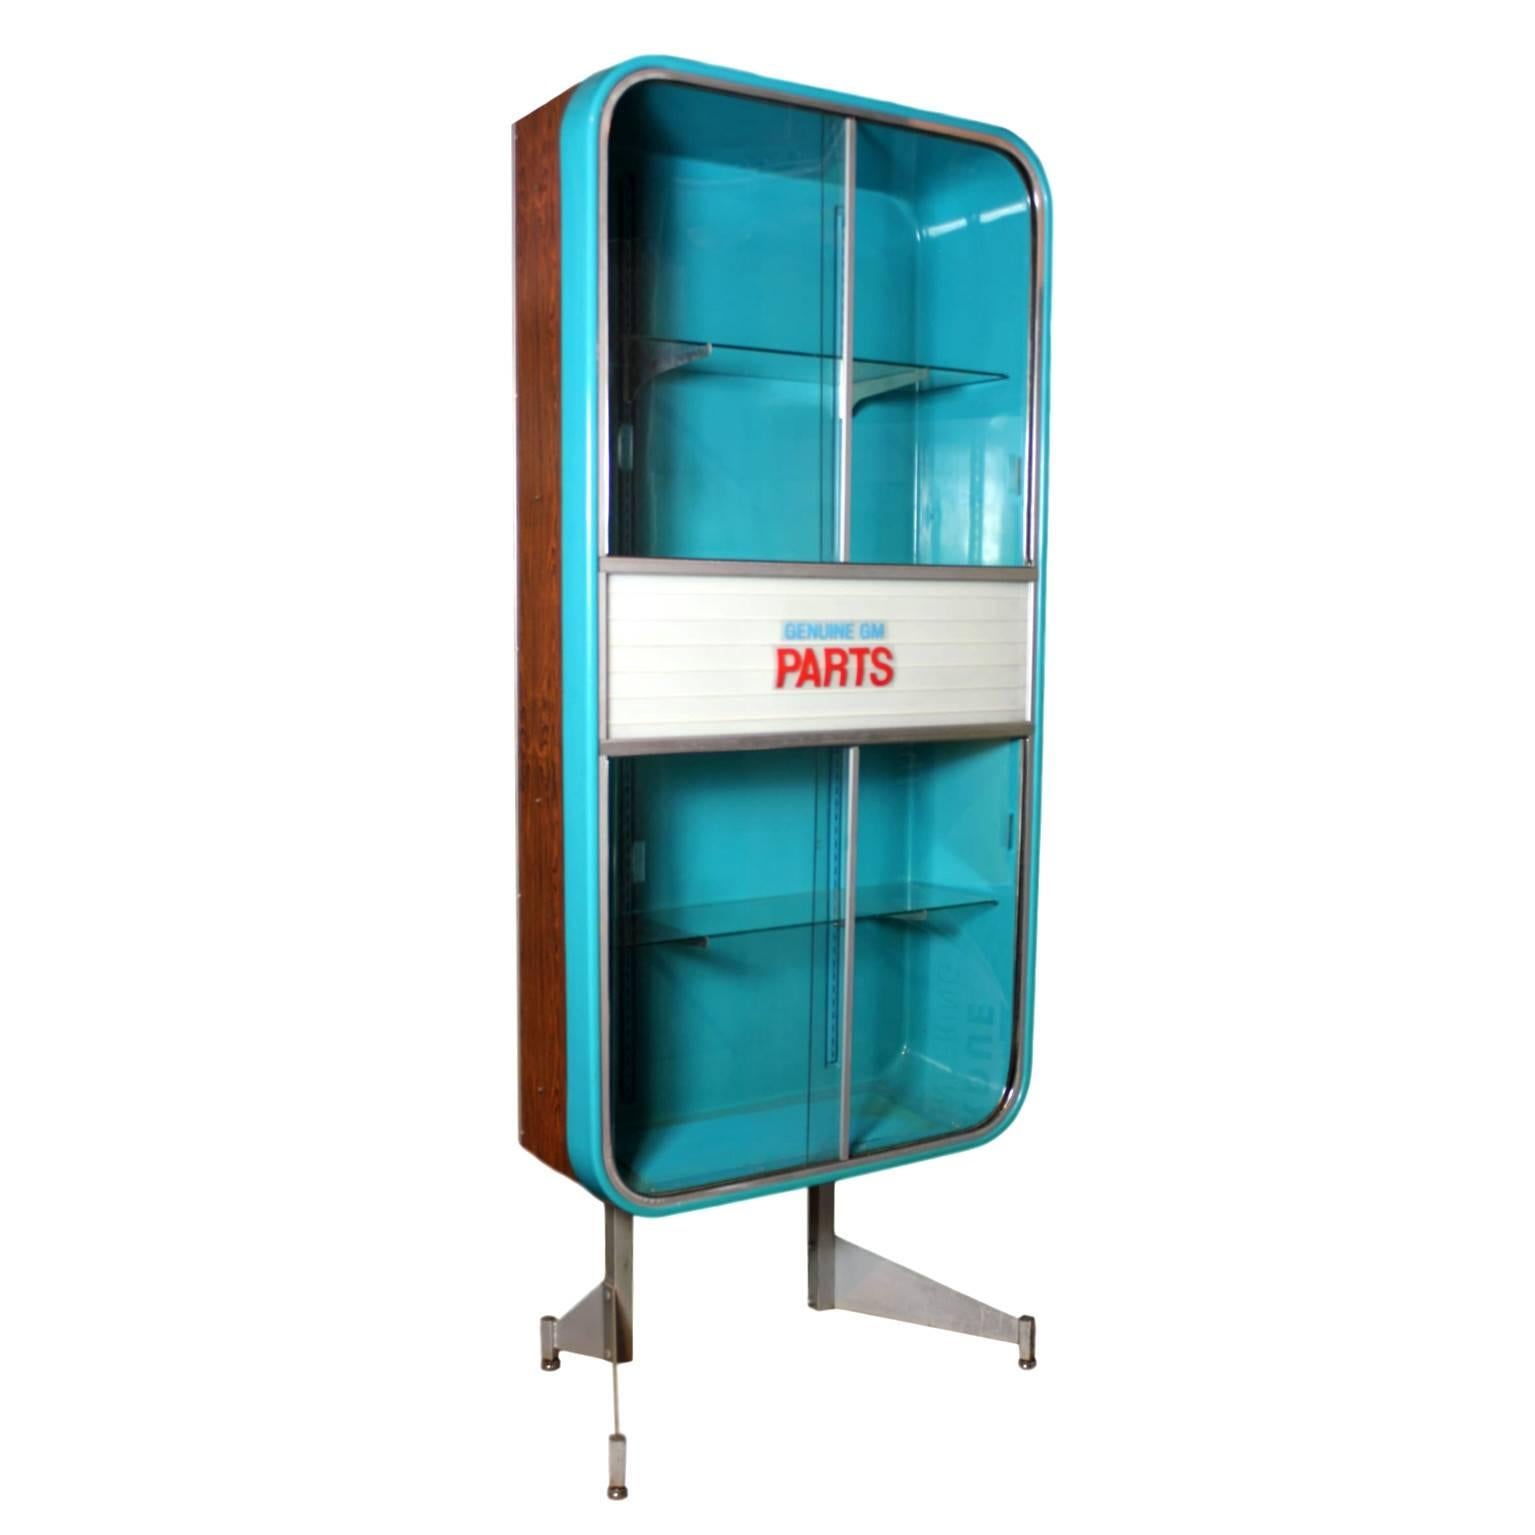 This seriously cool piece is a rare, original parts display cabinet from a 1960s GM dealership. Cabinet features a huge (36.5" x 71") turquoise vacuum-formed plastic tub wrapped in a faux-wood formica cabinet cantilevered over space-age